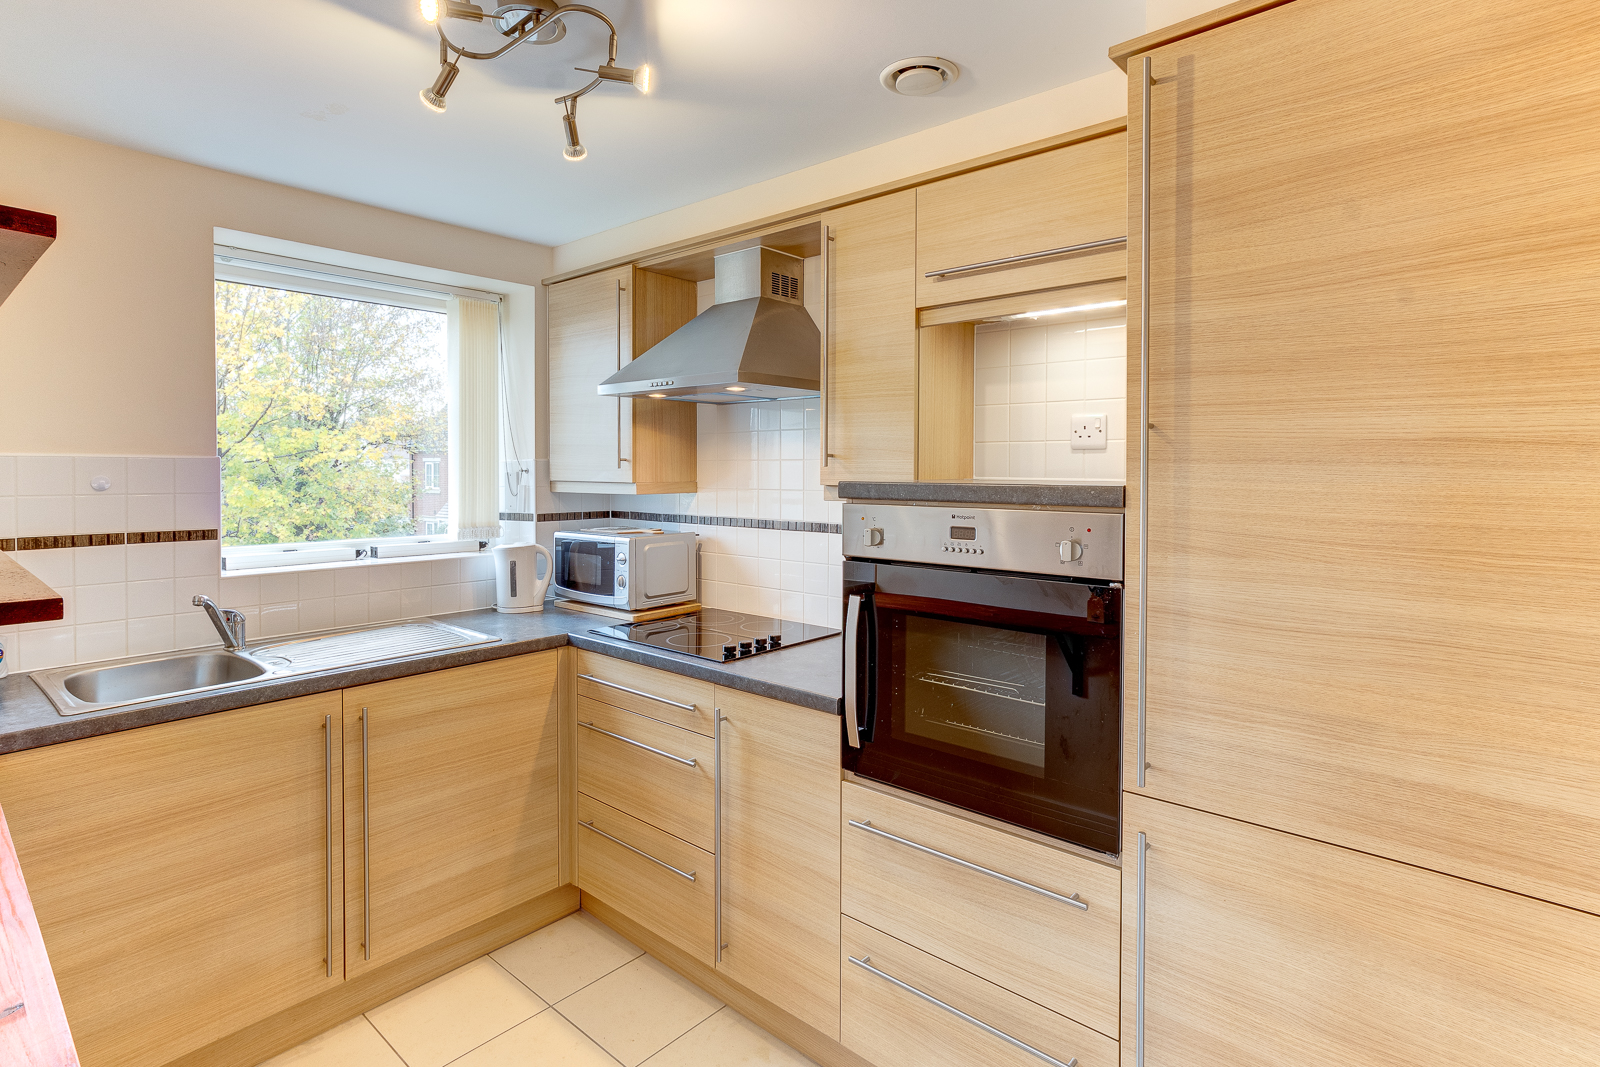 1 bed  for sale in Hanbury Road, Droitwich  - Property Image 6